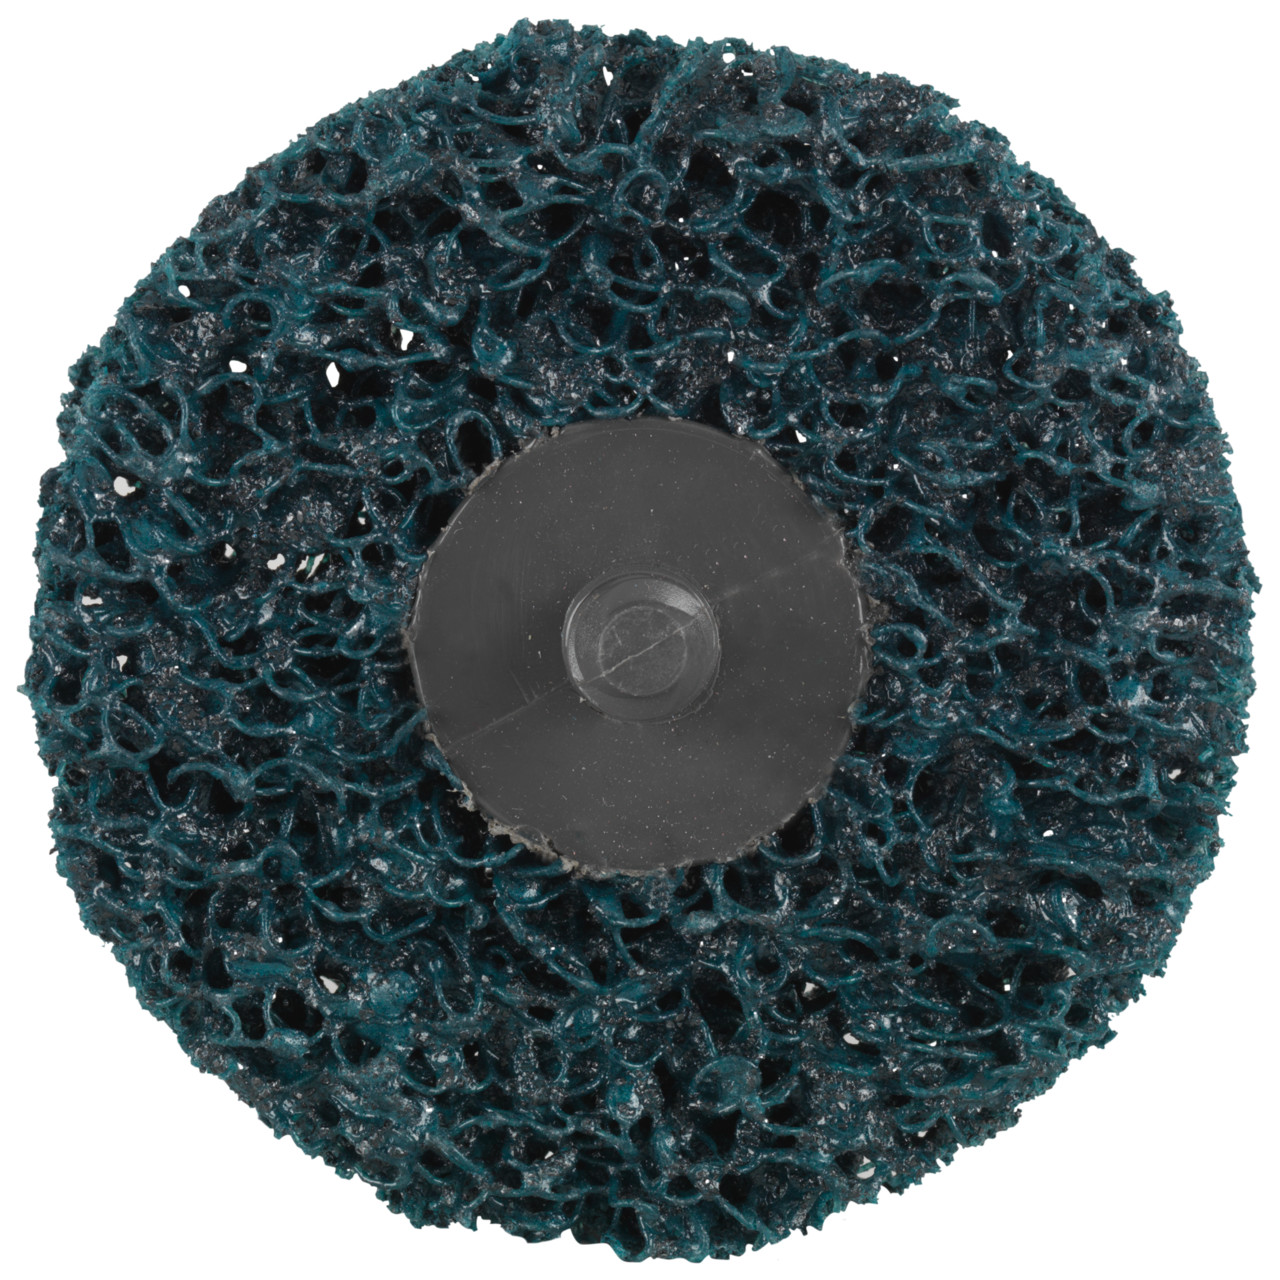 Tyrolit Coarse cleaning disc dimension 50xR For steel, stainless steel and PVC, C GROB, shape: QDISC, Art. 112602